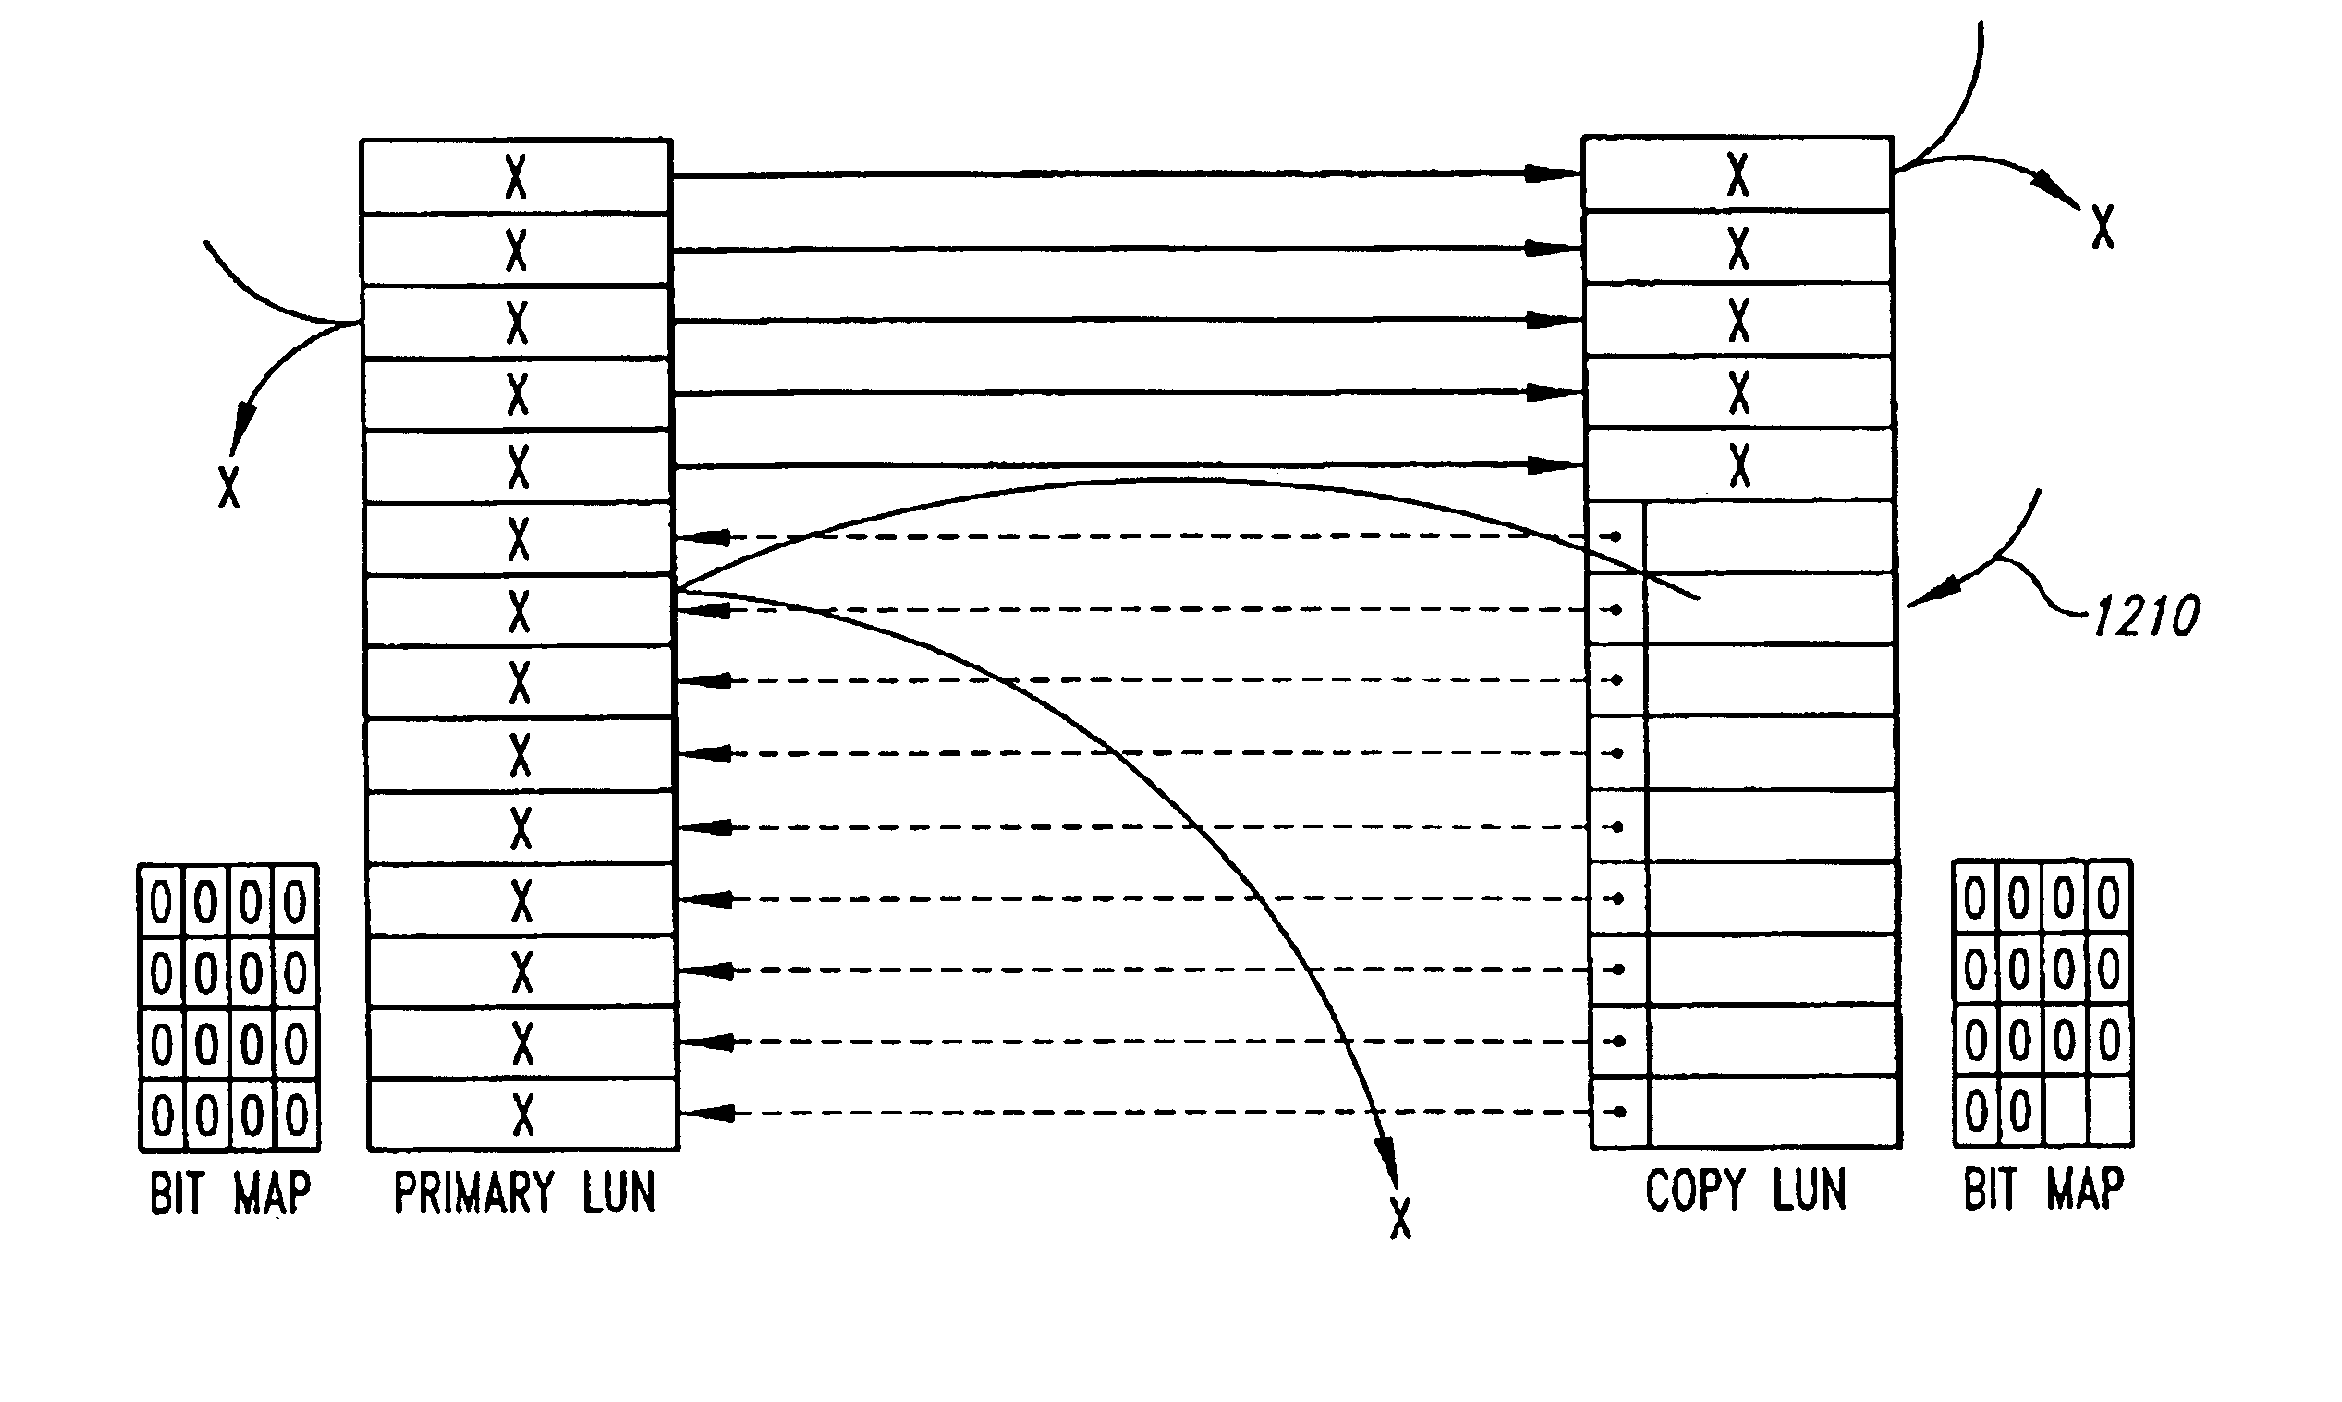 Immediately available, statically allocated, full-logical-unit copy with a transient, snapshot-copy-like intermediate stage